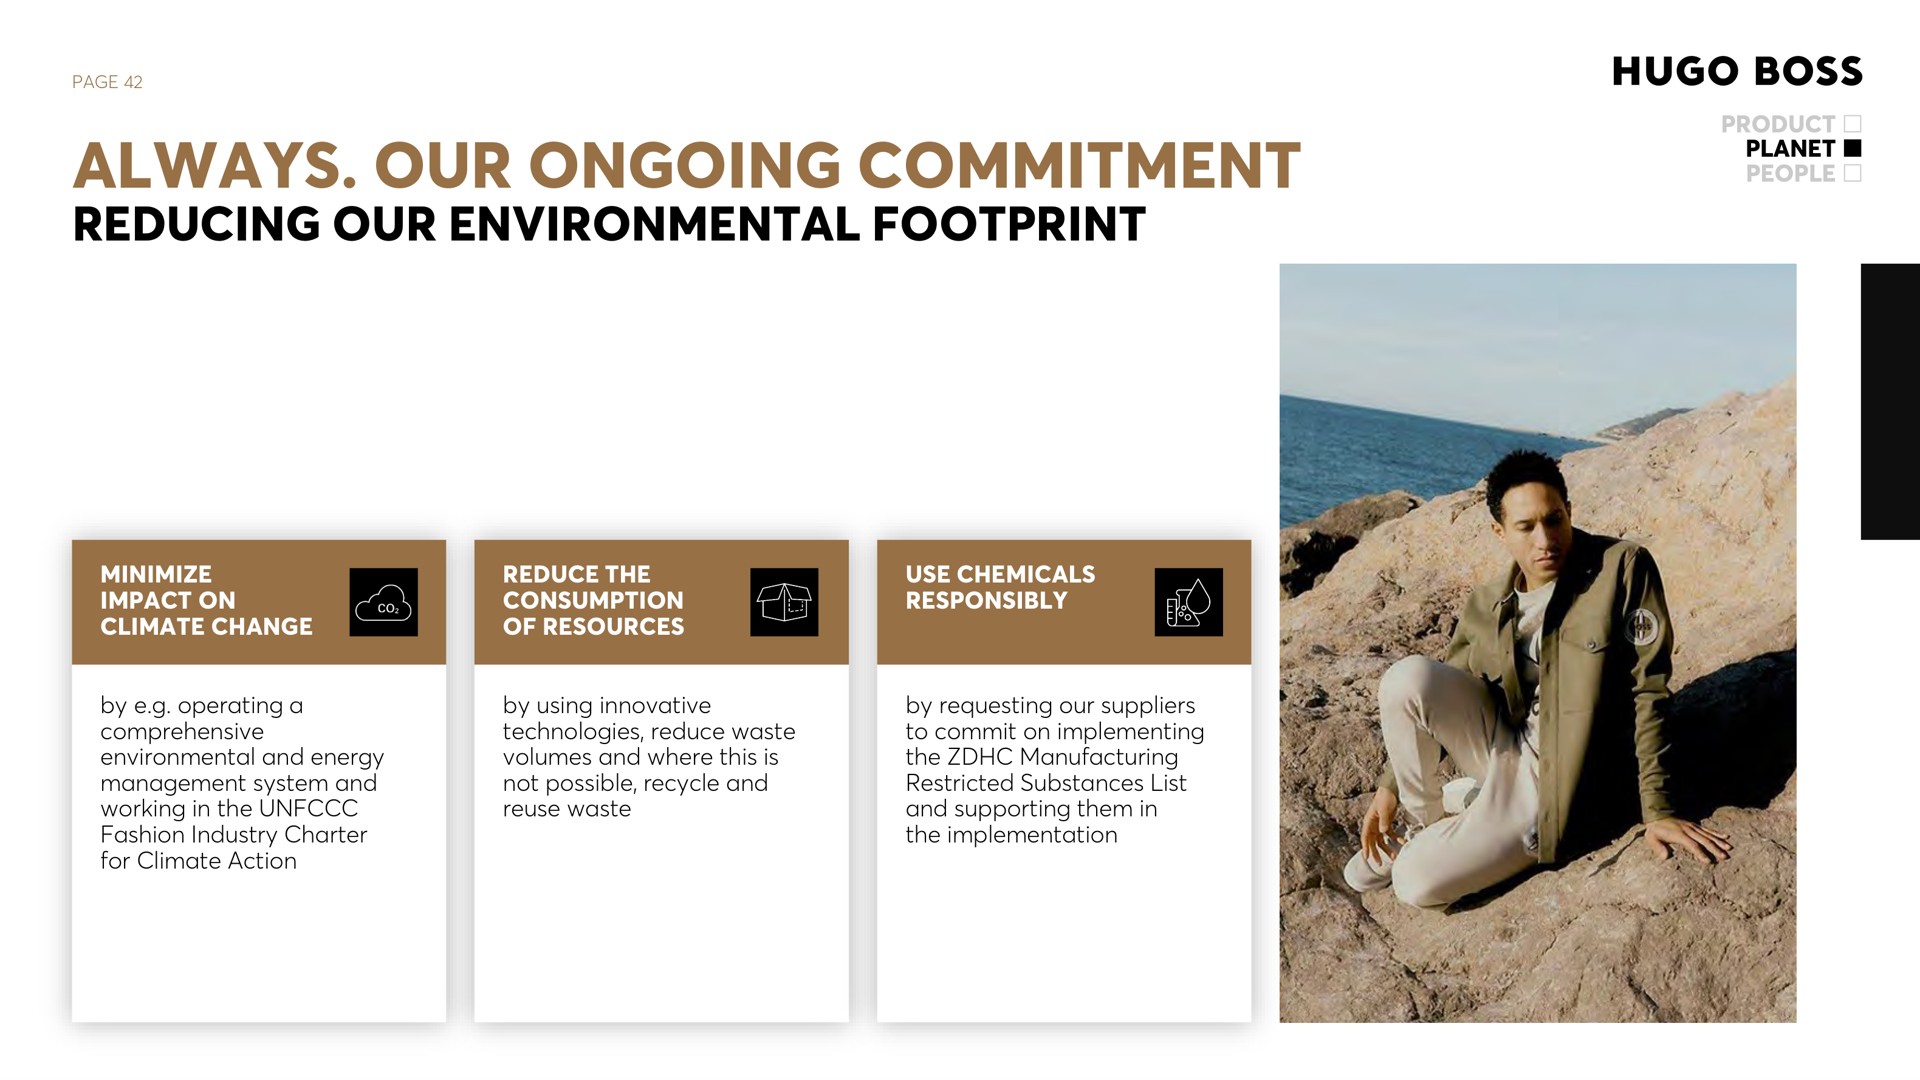 page always our ongoing commitment reducing our environmental footprint product planet people minimize impact on climate change reduce the consumption of resources use chemicals responsibly by operating a comprehensive environmental and energy management system and working in the fashion industry charter for climate action by using innovative technologies reduce waste volumes and where this is not possible recycle and reuse waste by requesting our suppliers to commit on implementing the manufacturing restricted substances list and supporting them in the implementation | Hugo Boss